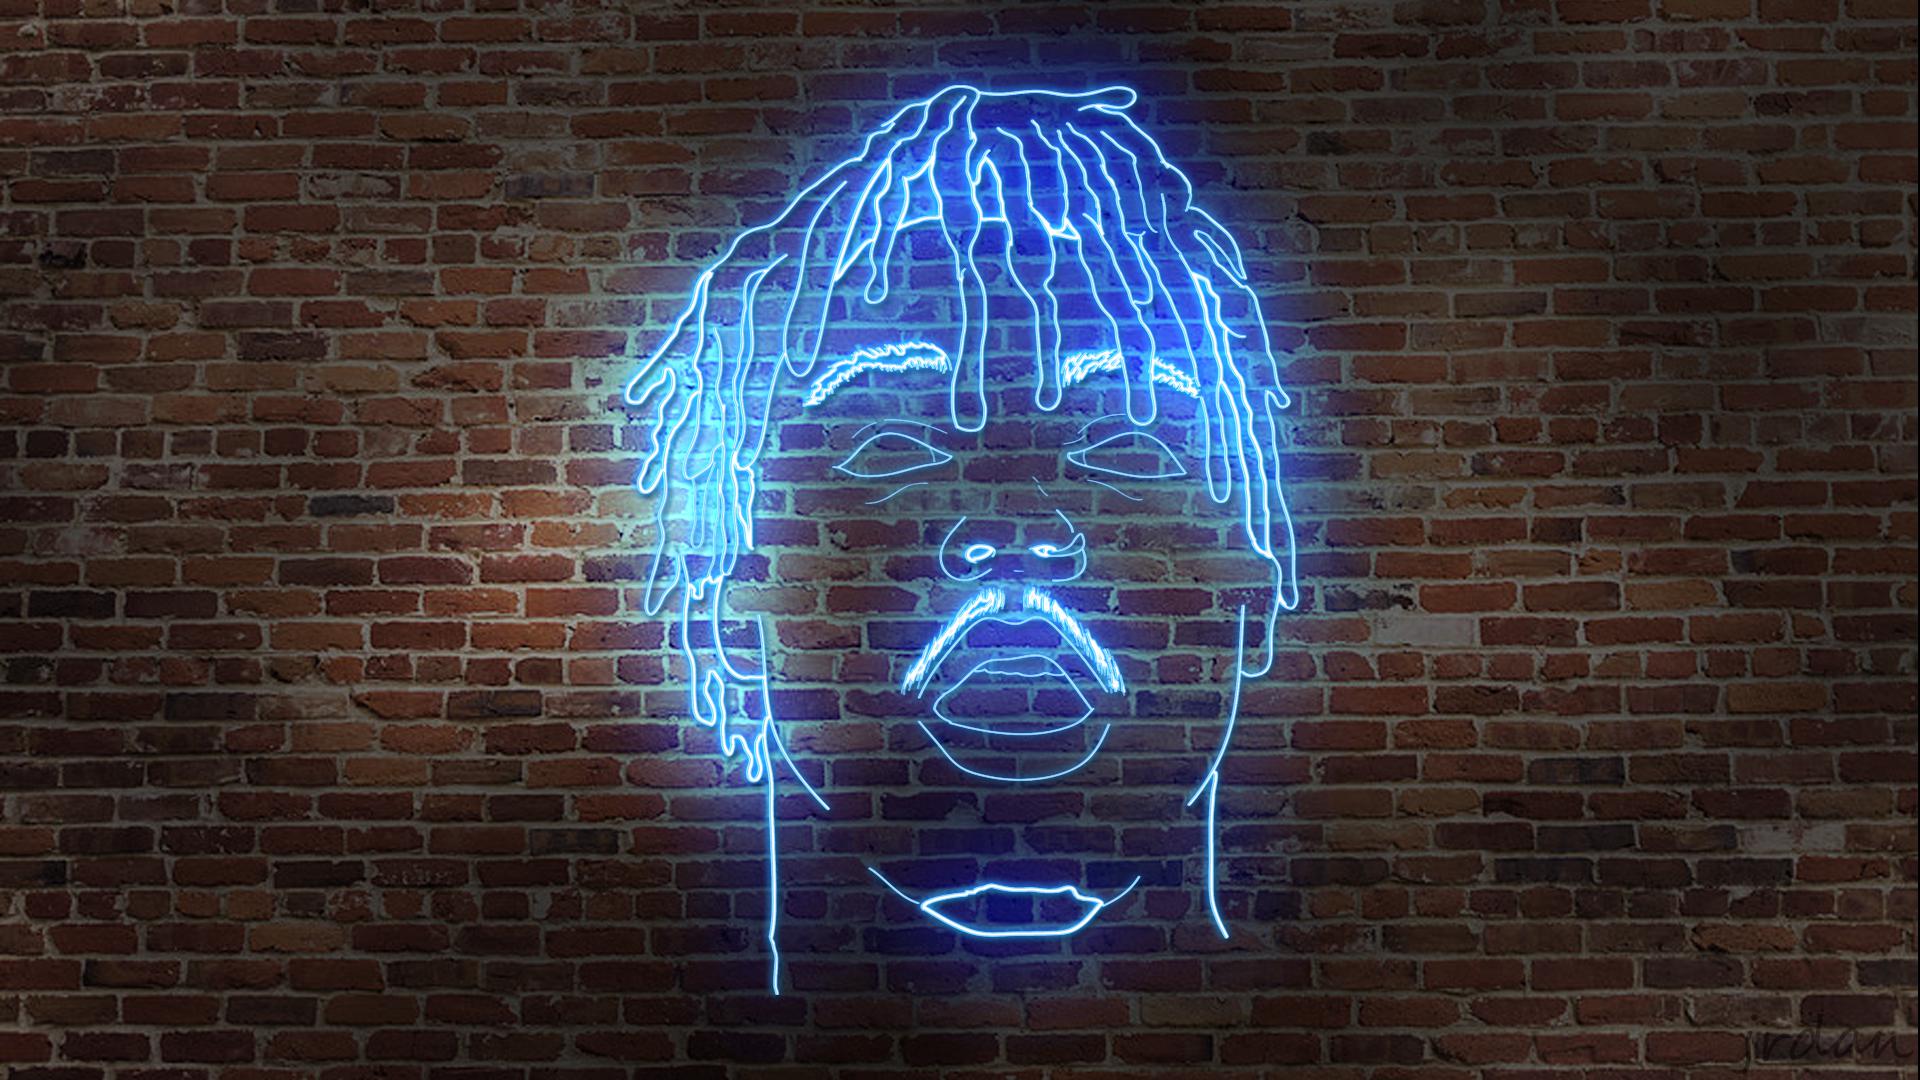 Tons of awesome juice wrld 999 computer wallpapers to download for free. 